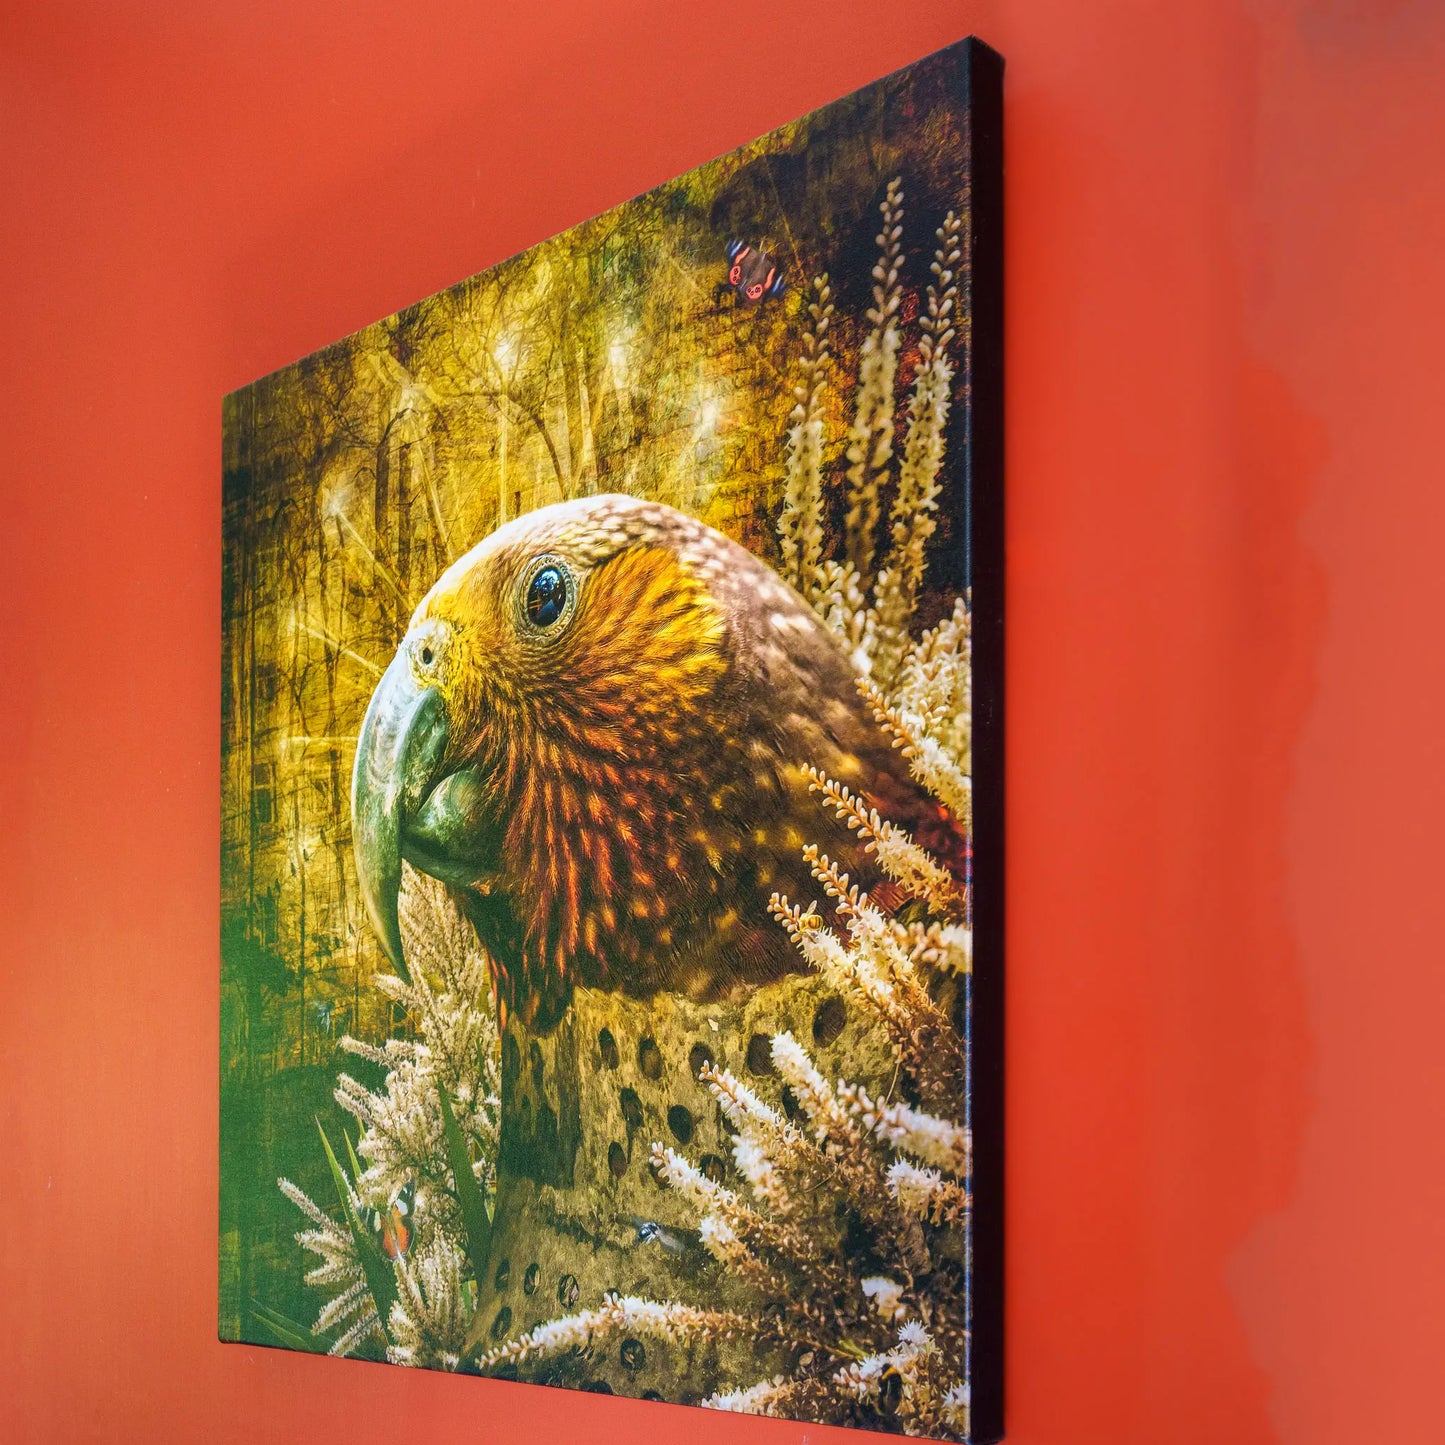 Photograph of a kākā canvas print on a red wall - angled view